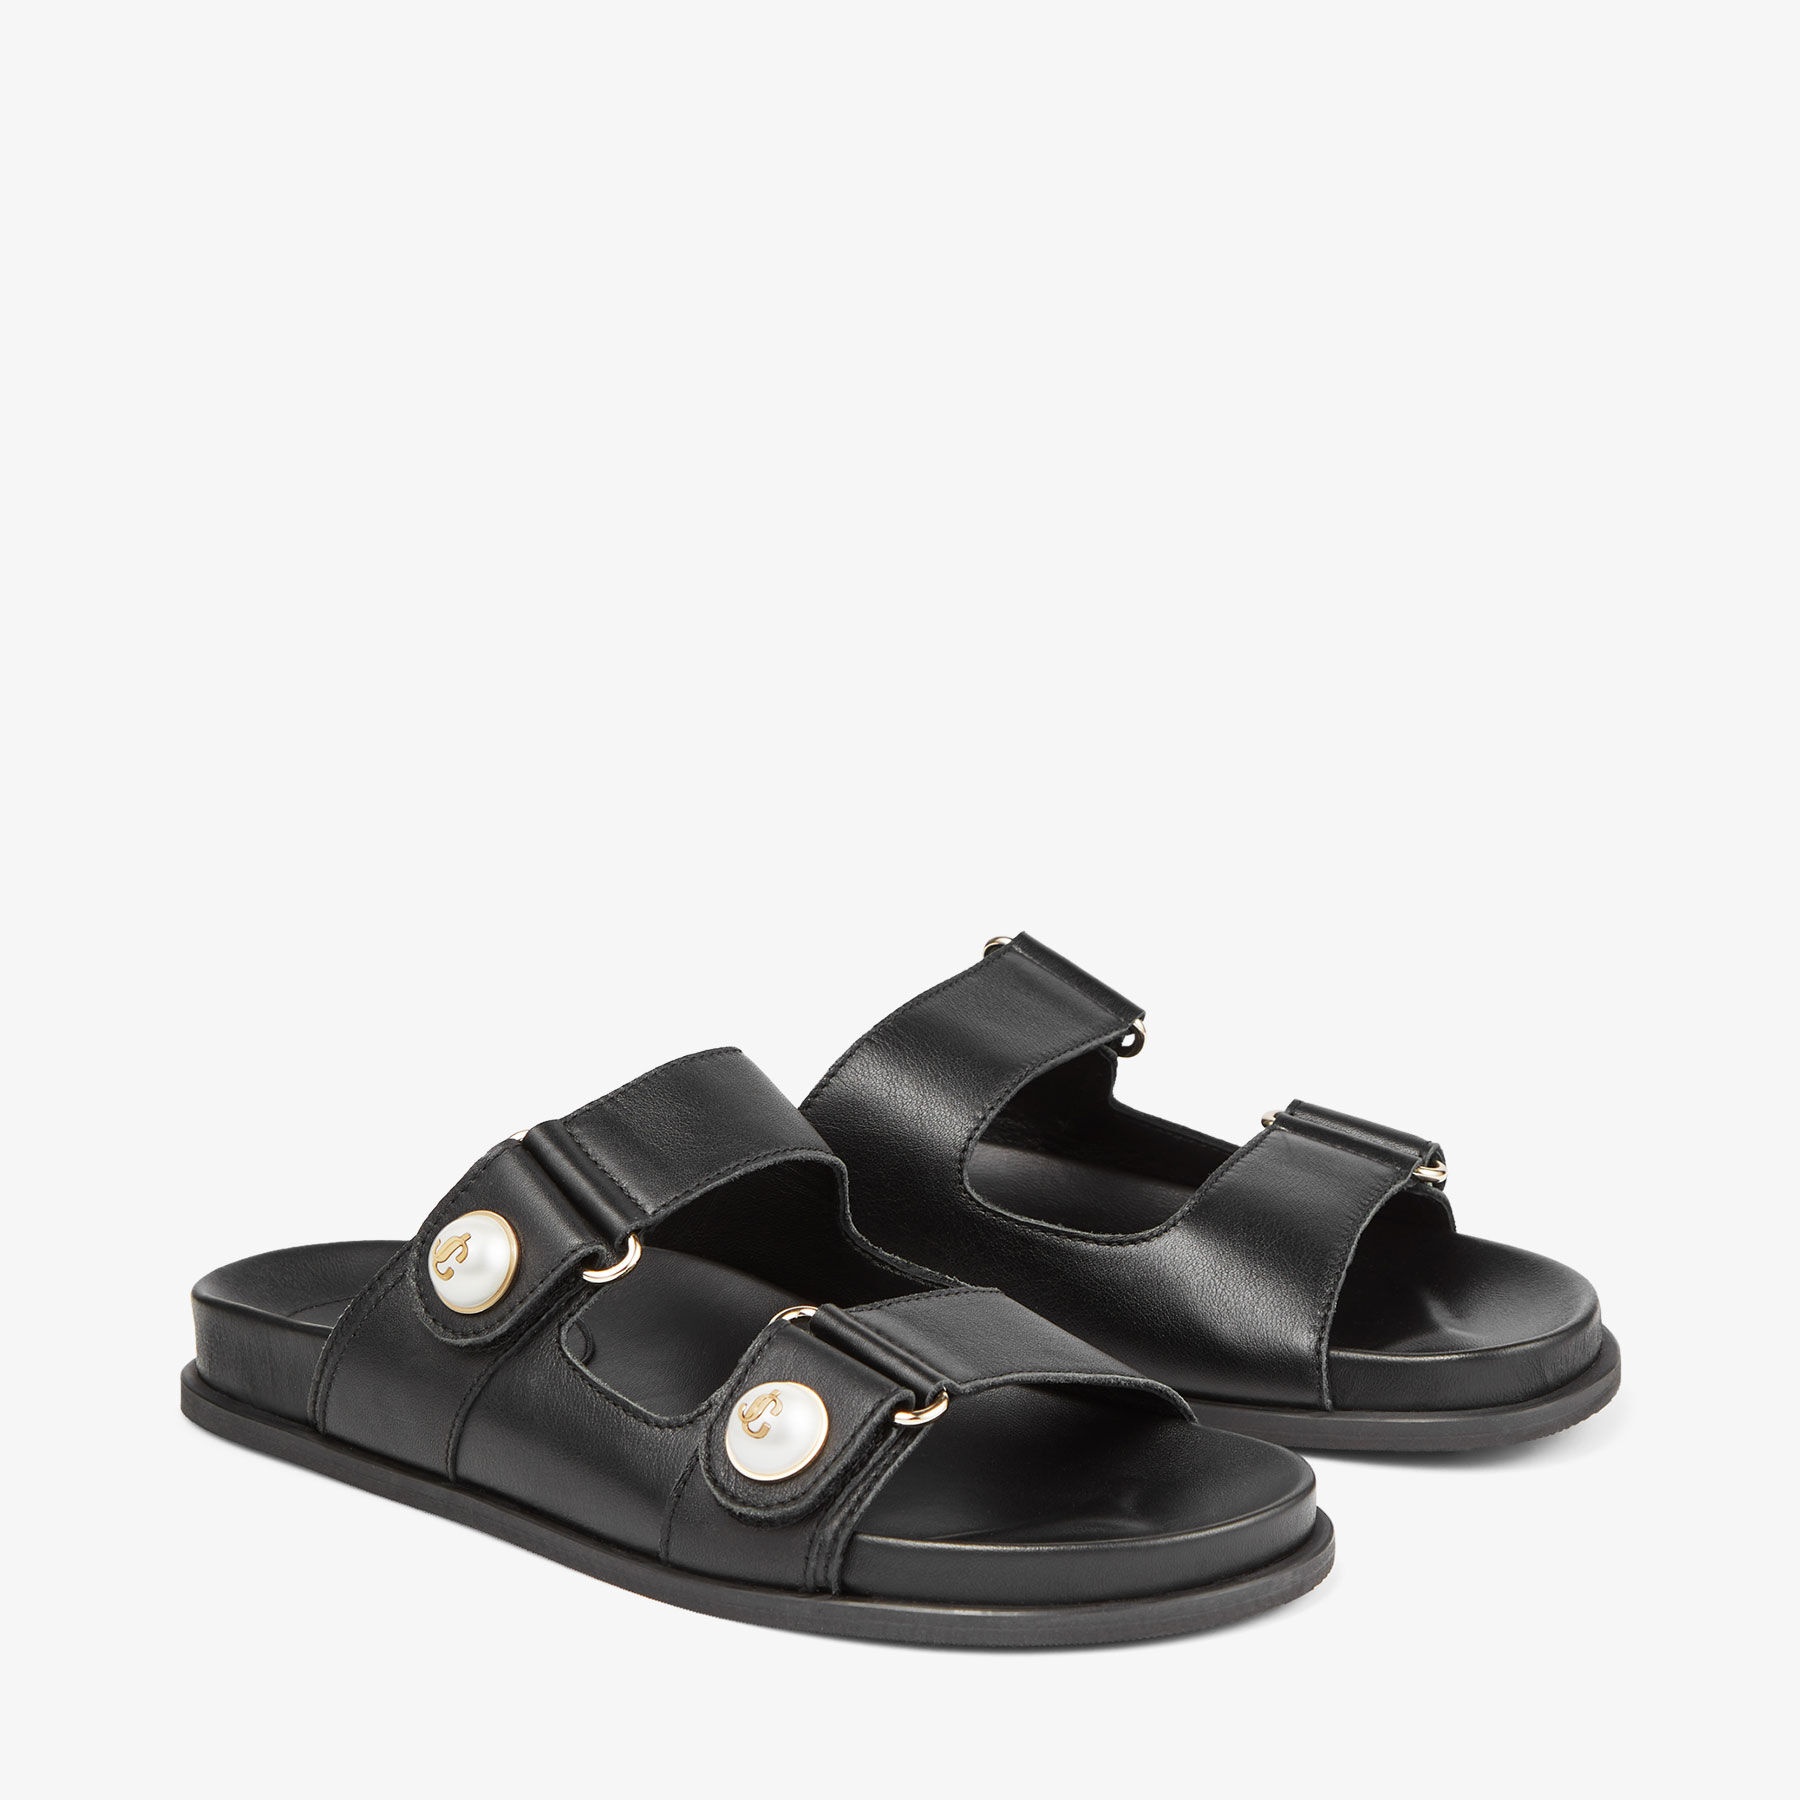 JIMMY CHOO Fayence Sandal Black Leather Flat Sandals with Pearl